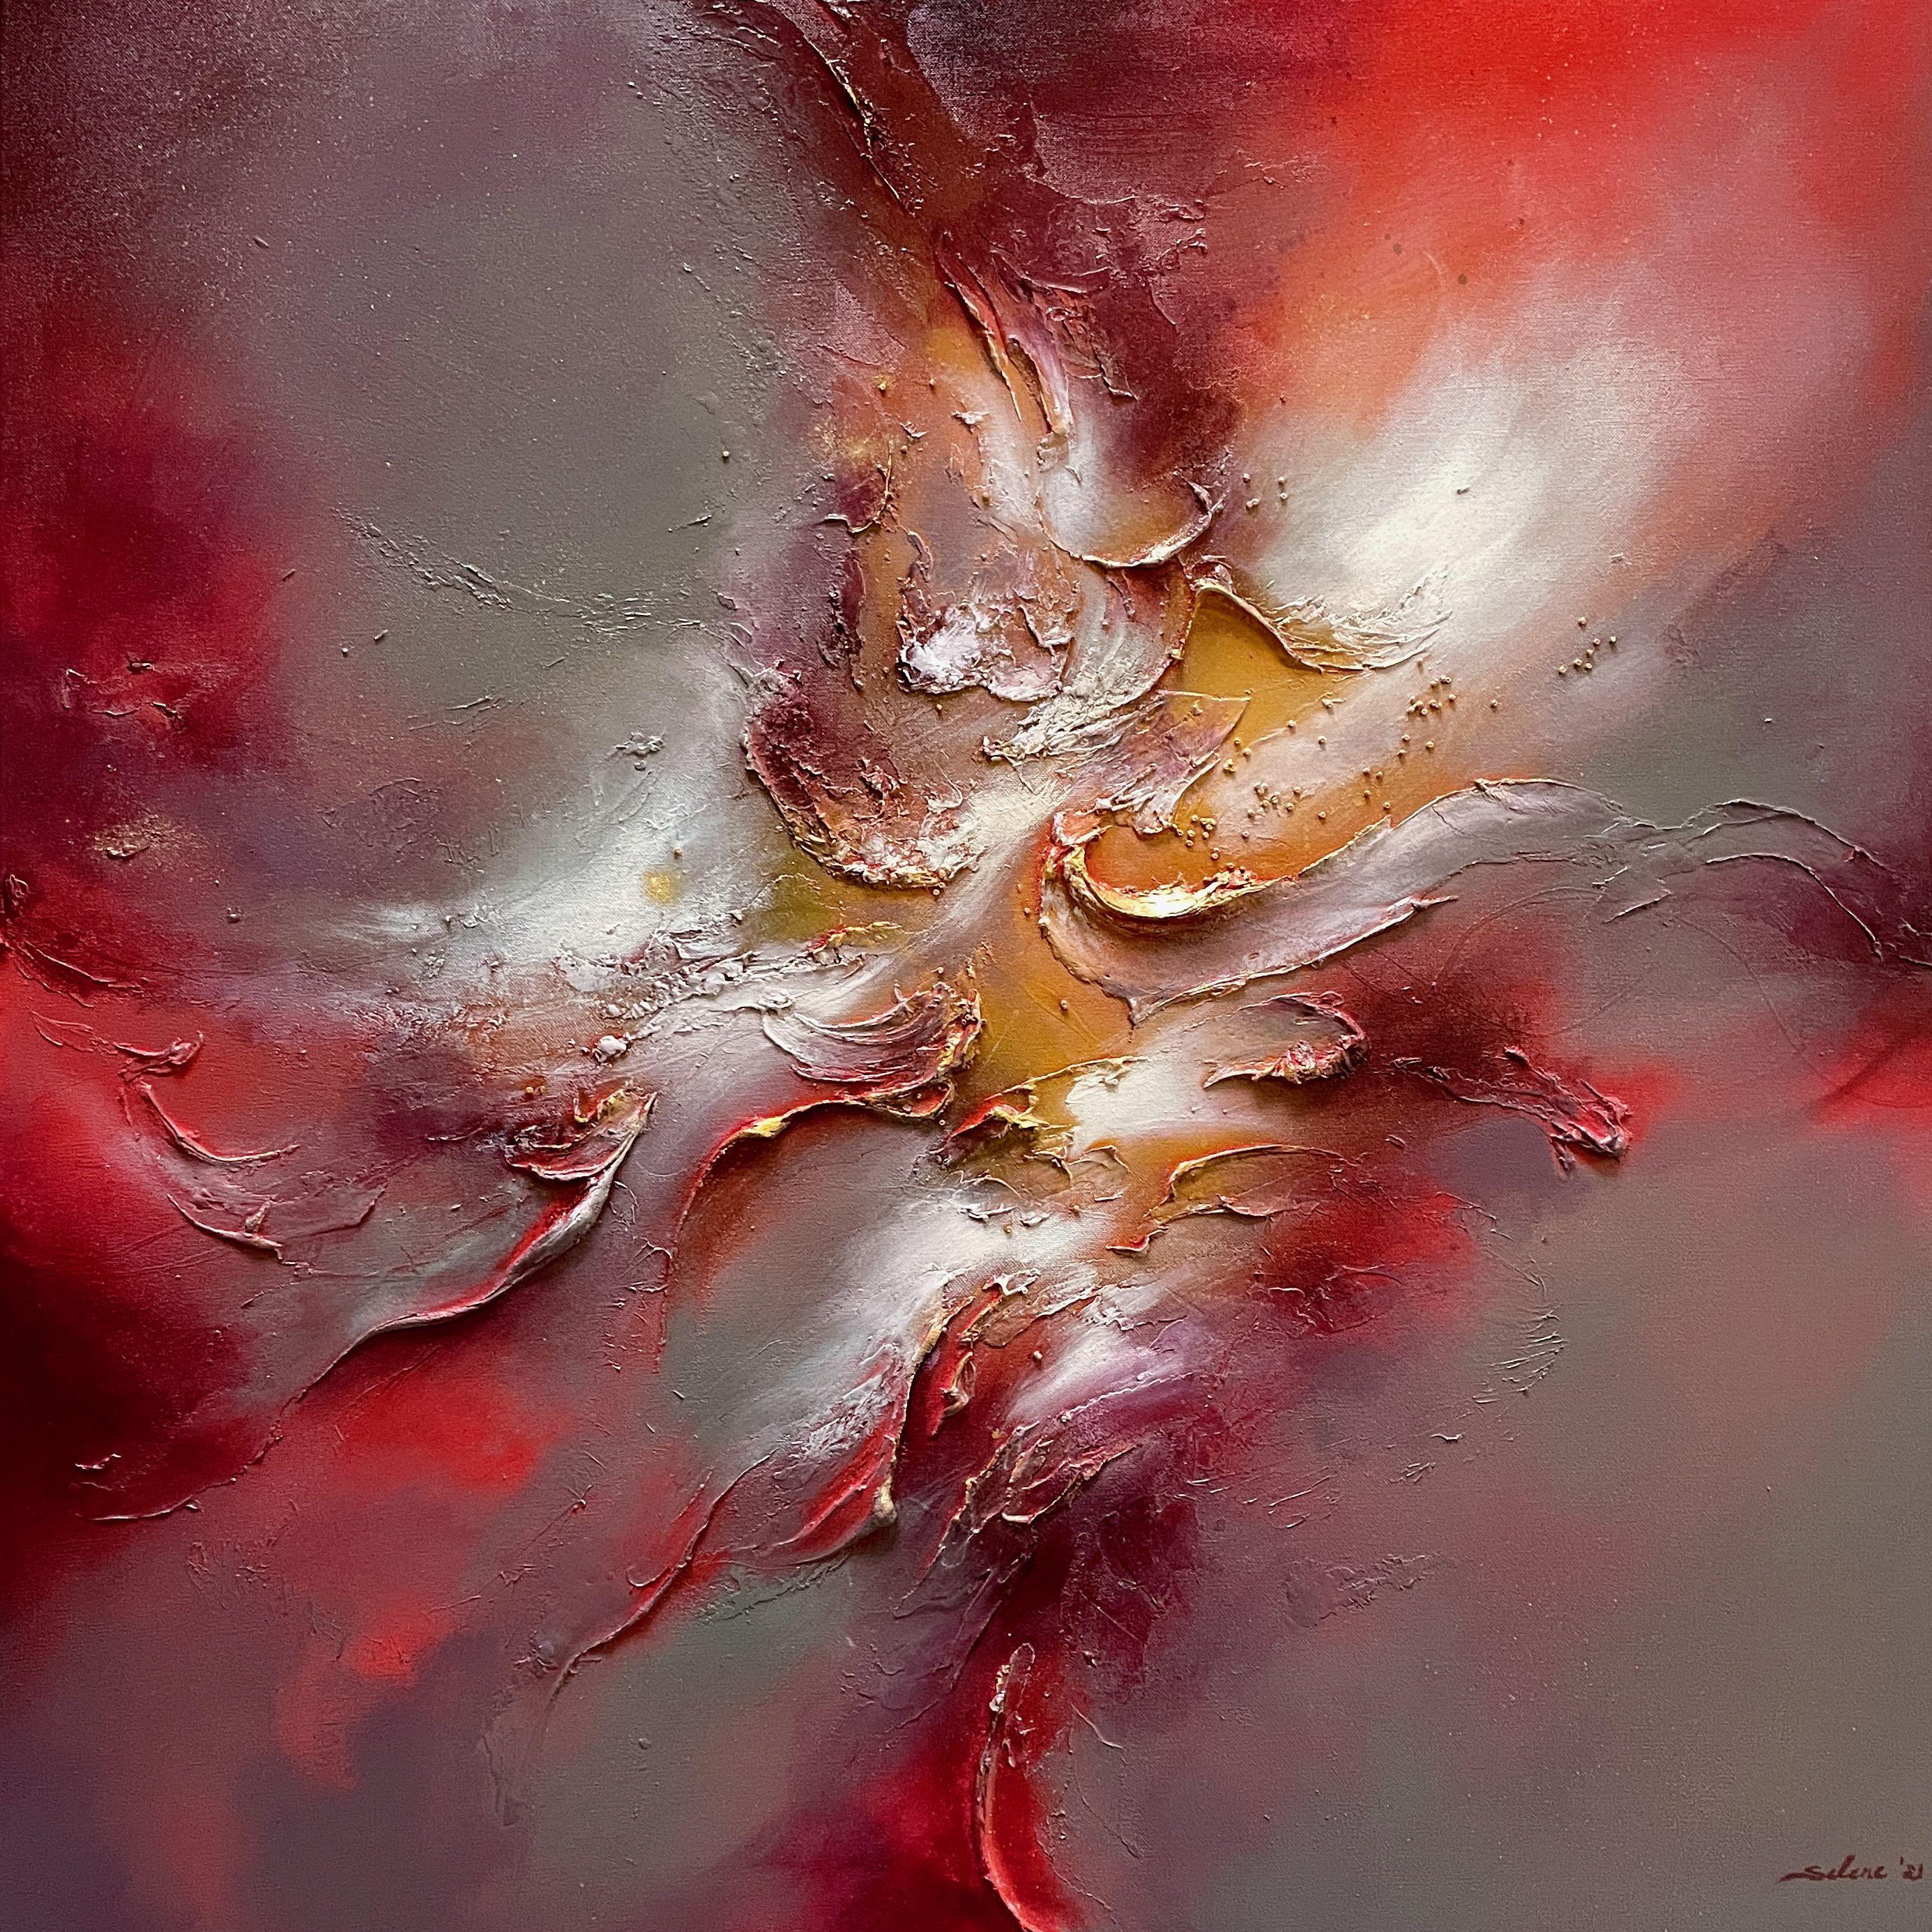 Selene Art Abstract Painting - Fire from within, Painting, Acrylic on Canvas